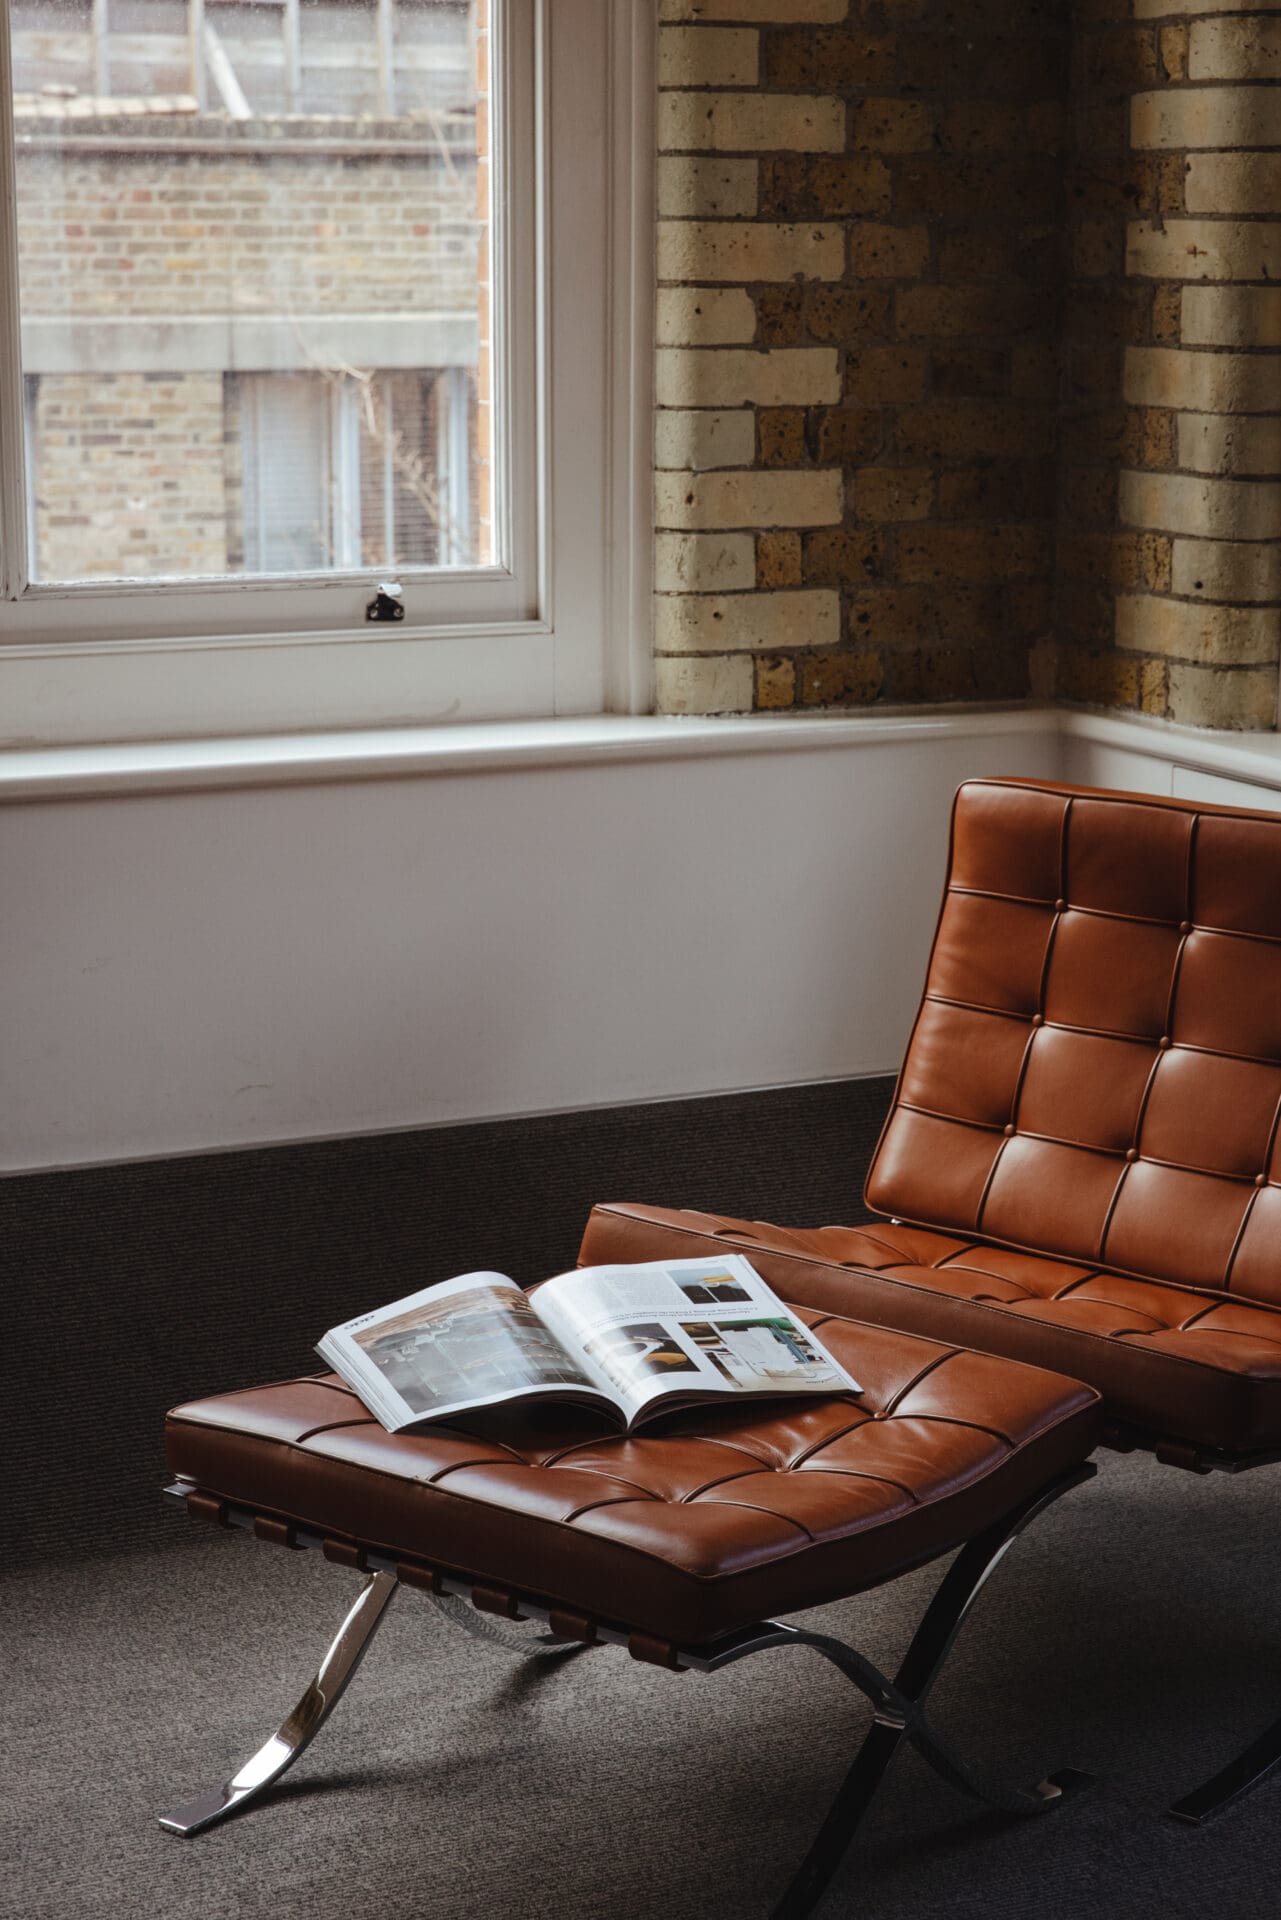 Best hotels in Shoreditch, Dalston and Hackney | A brown leather Barcelona chair and foot rest in a corner of a room inside Boundary, with a magazine opened on the foot rest.